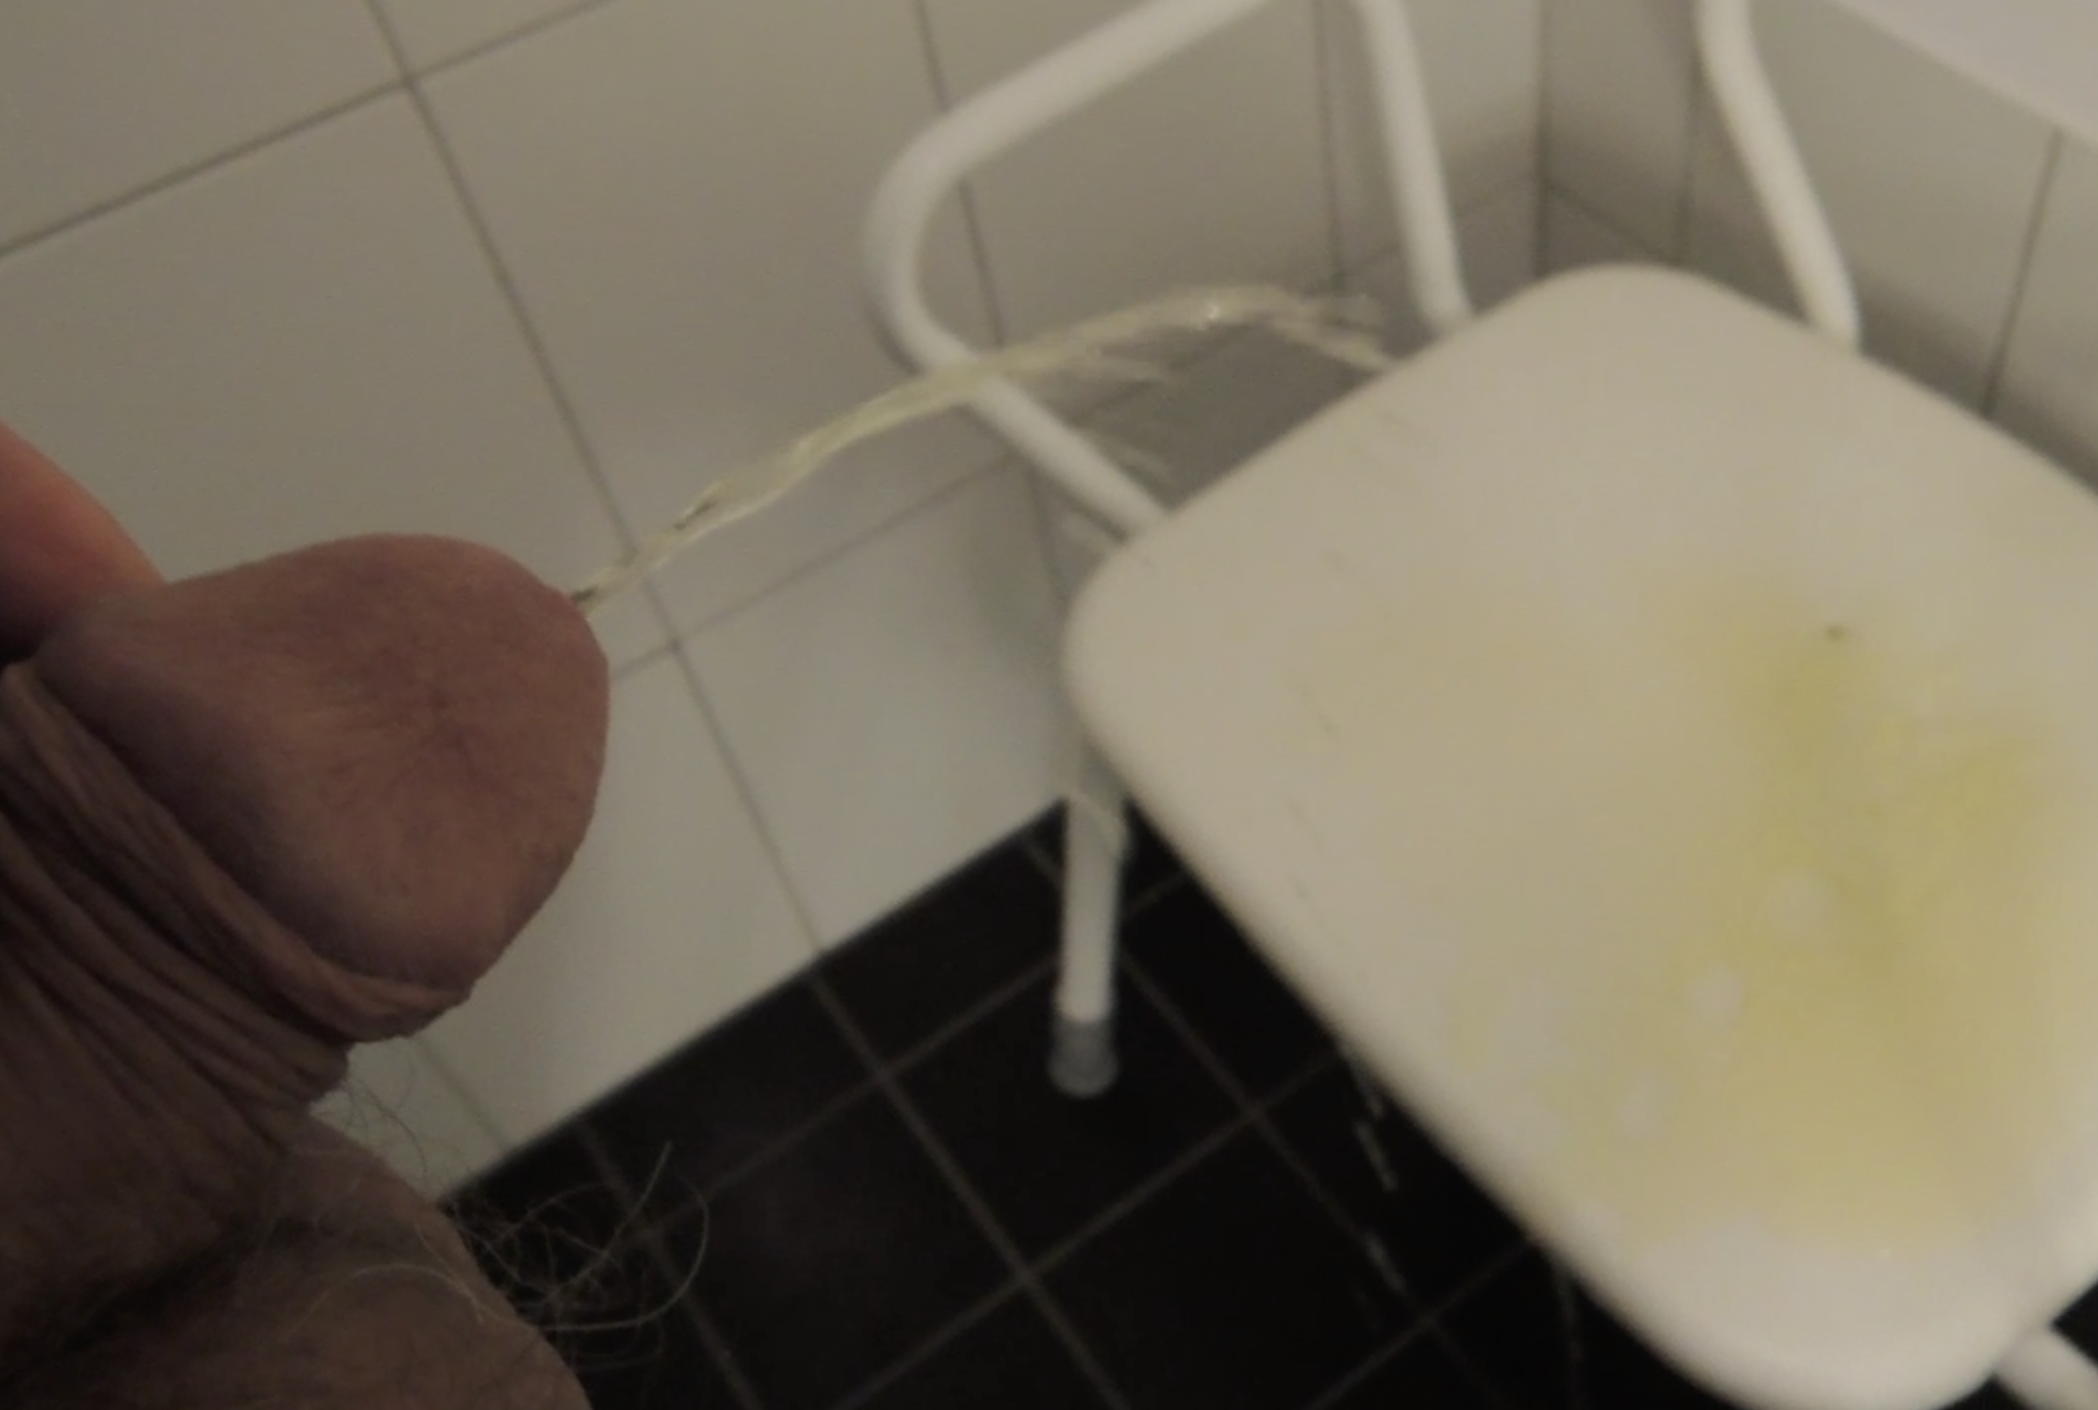 Me pissing on a chair